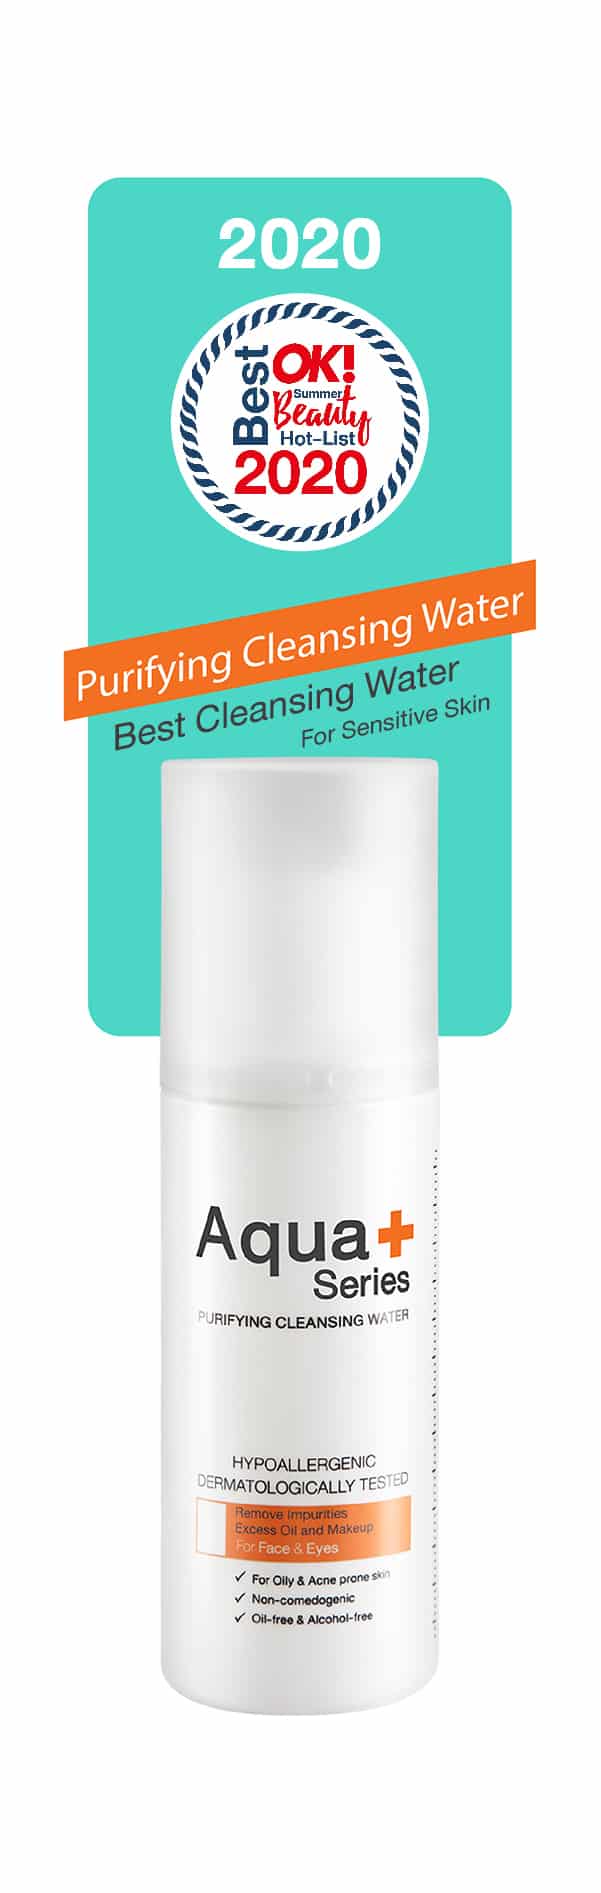 Purifying Cleansing Water